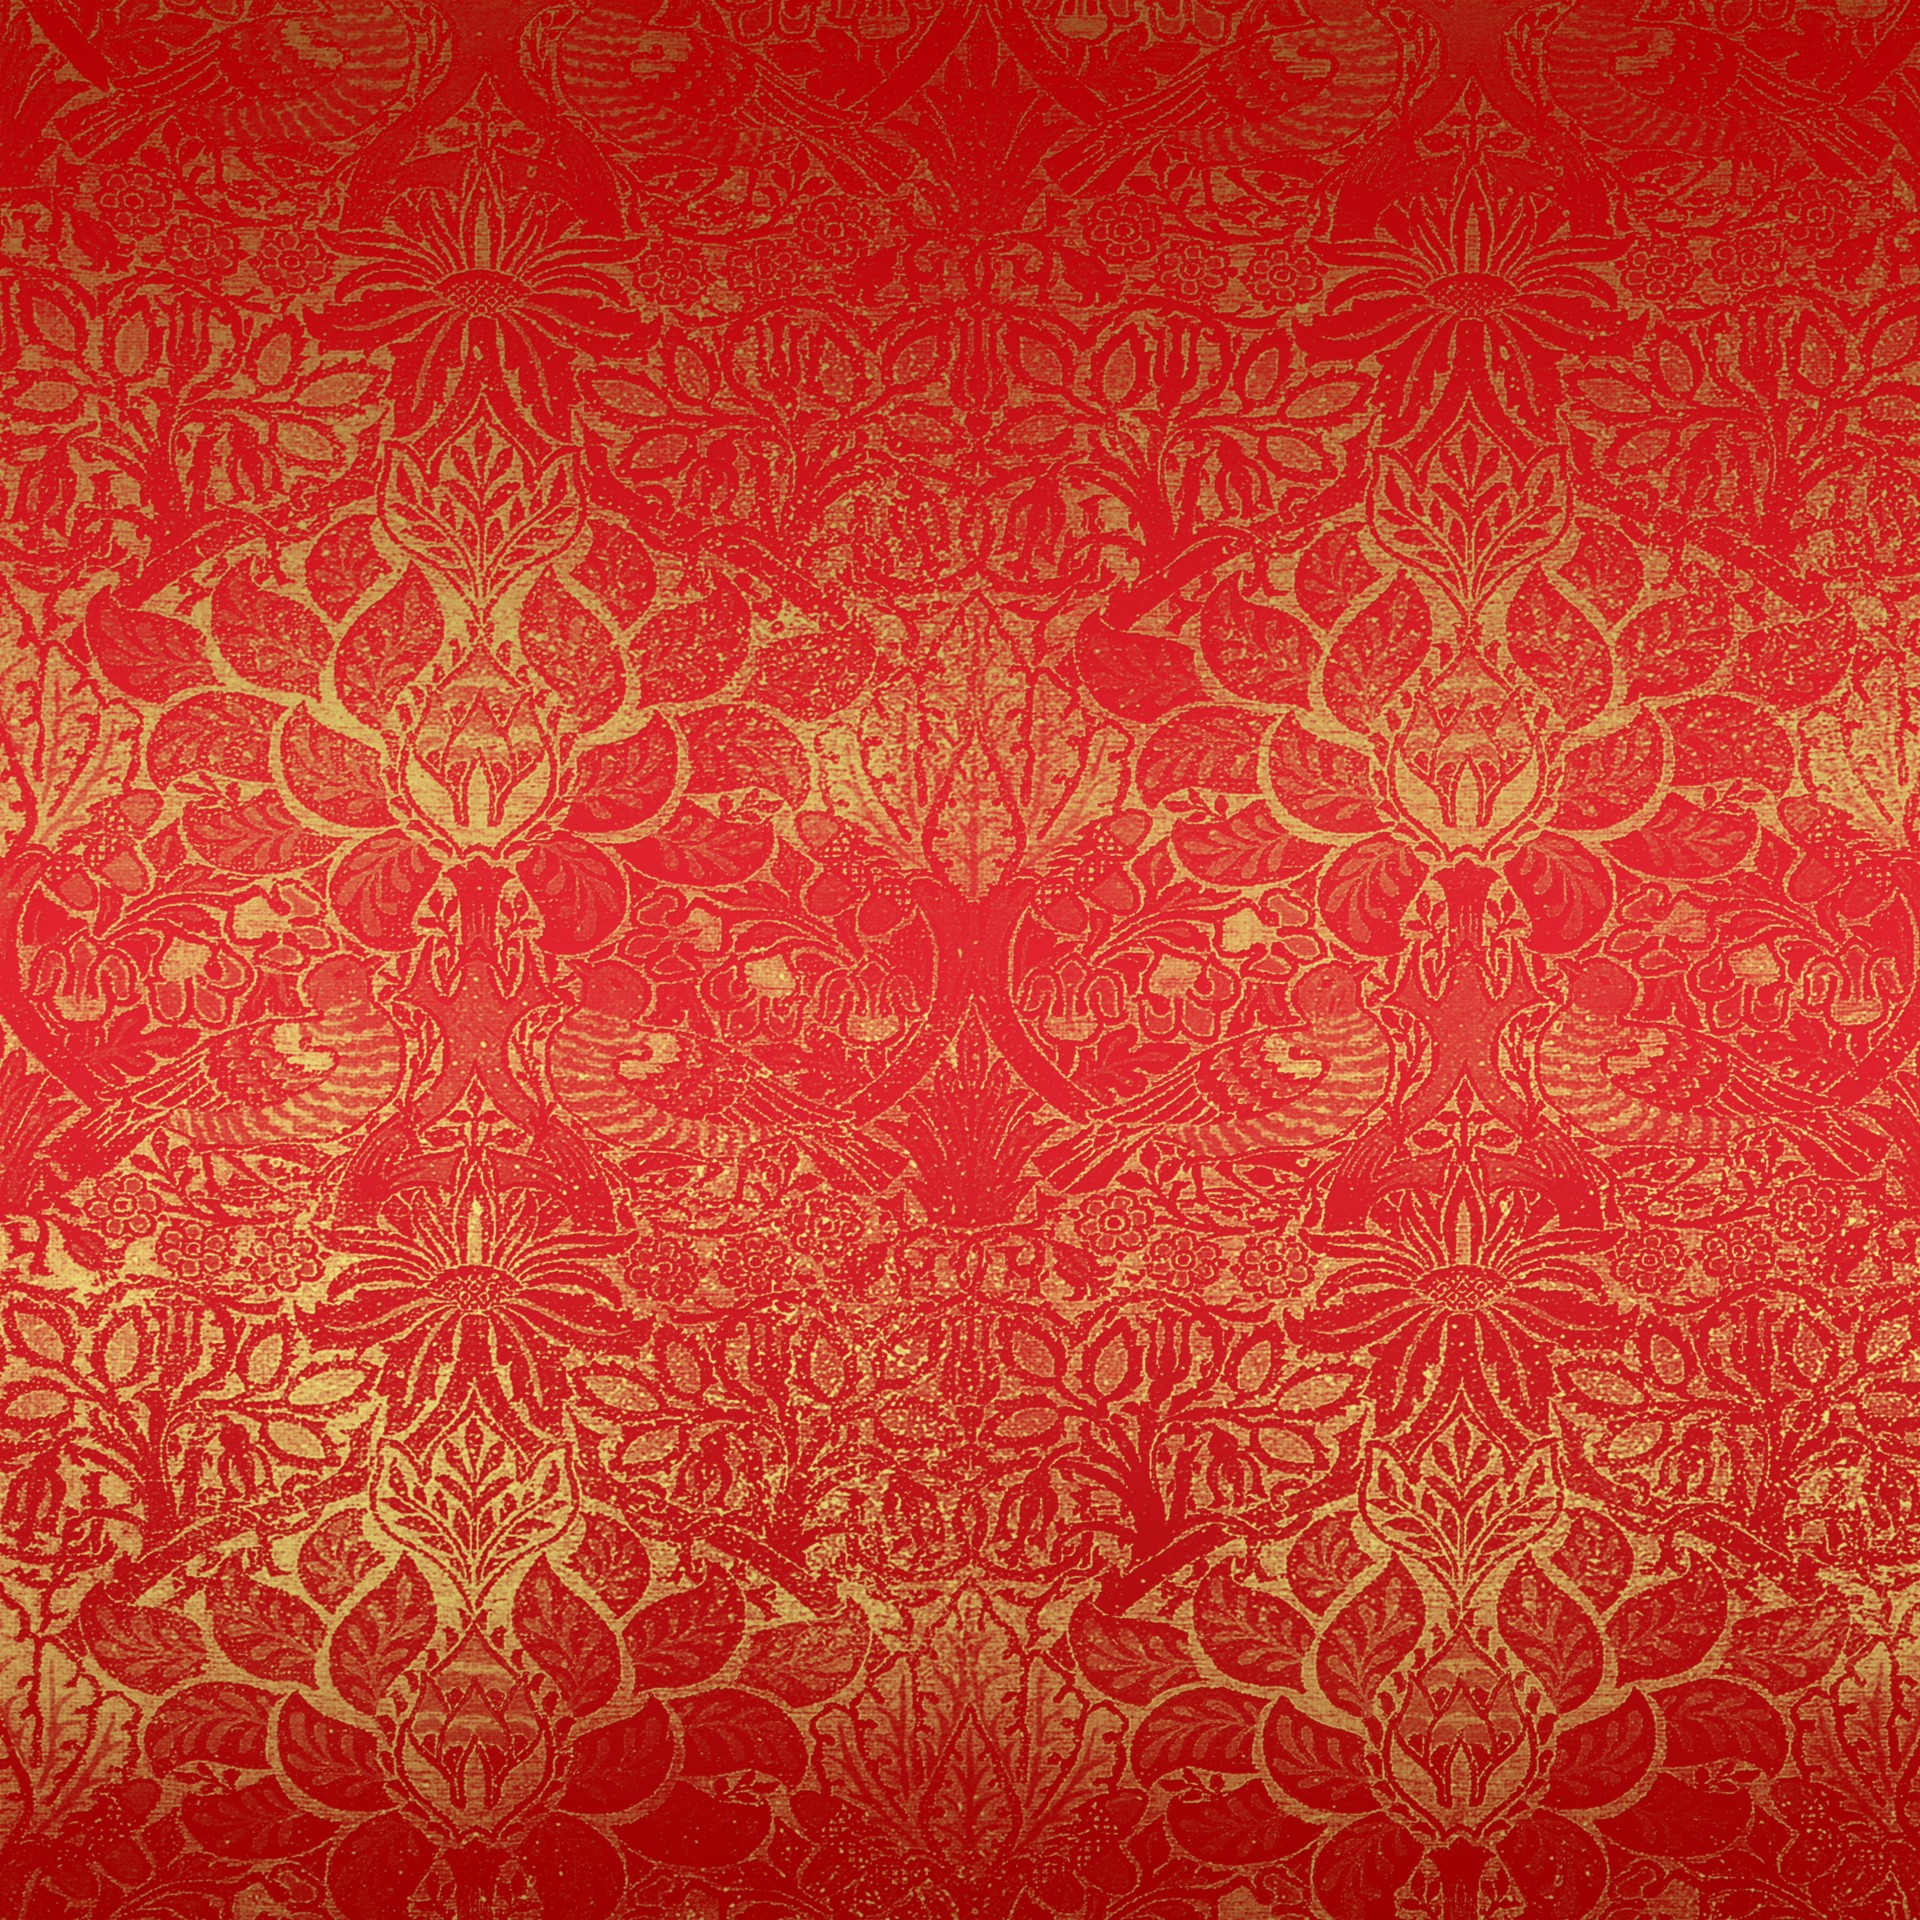 grunge floral red gold effect background paper papers free photo